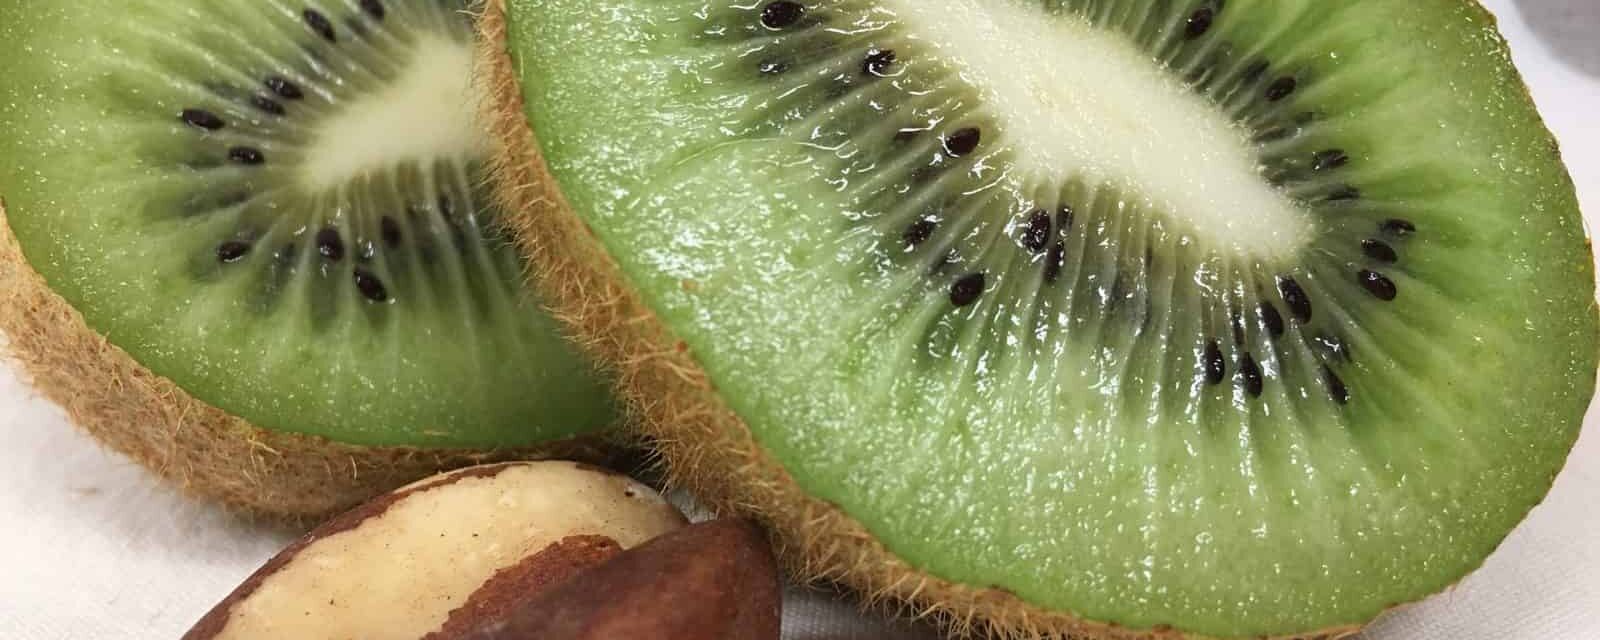 CARE Snack: Immune & Thyroid Booster – Kiwi Fruit with Brazil Nuts